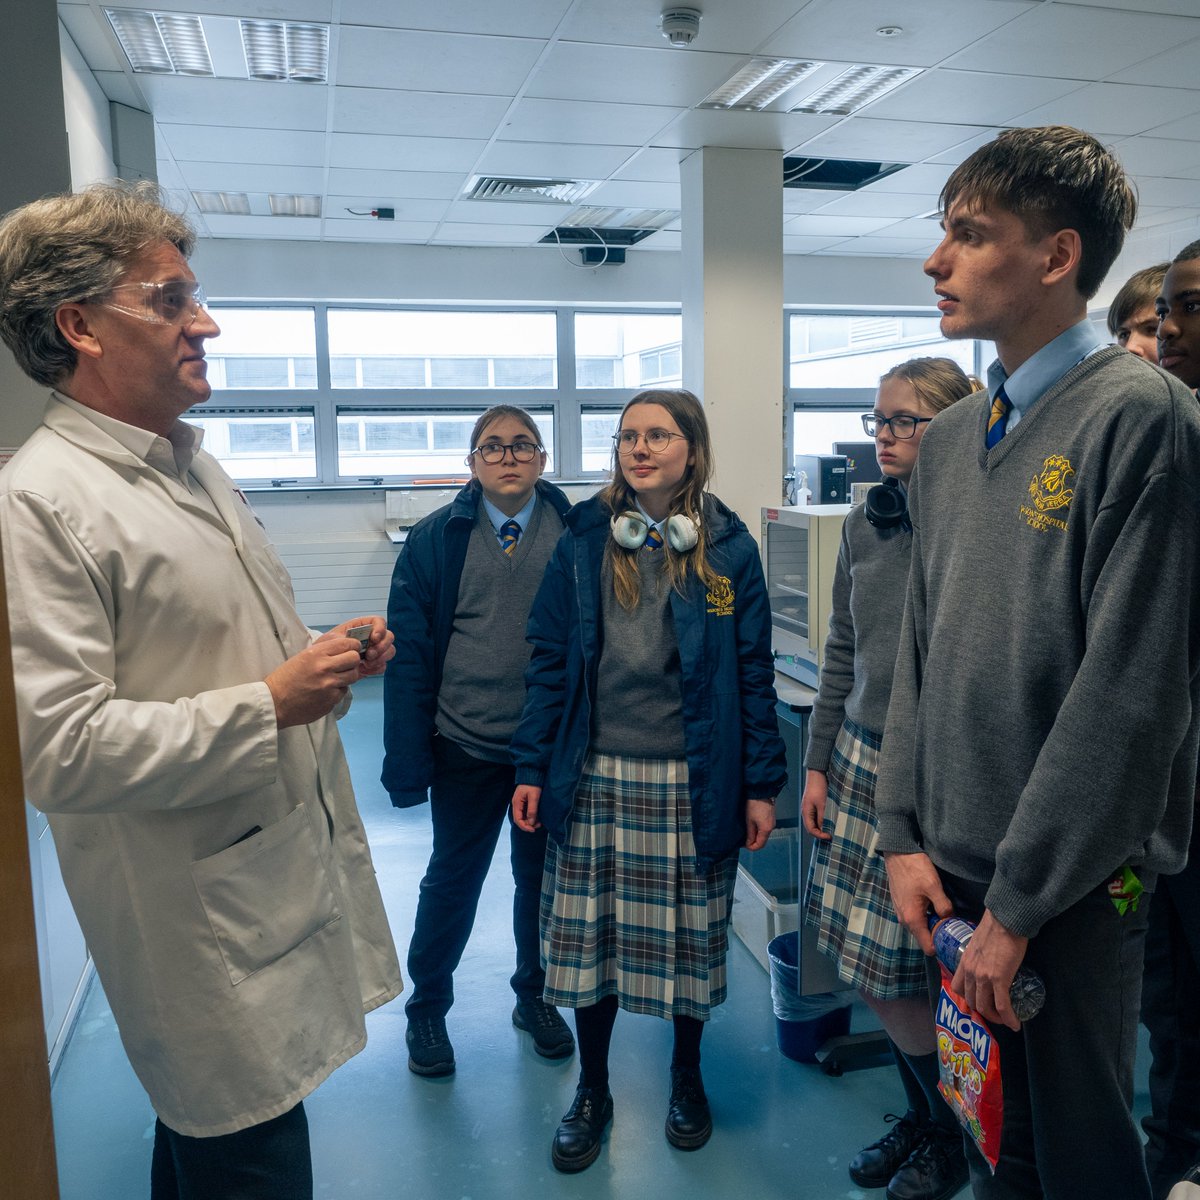 We hosted TY students from @WilsonsHospital this week for the 4th annual Think Smart, Create Green @EU_CONEXUS project! 🌍 They kicked off with a #ClimateFresk workshop, toured SETU's labs and presented their project 'Reef Relief' for an upcoming international schools contest.